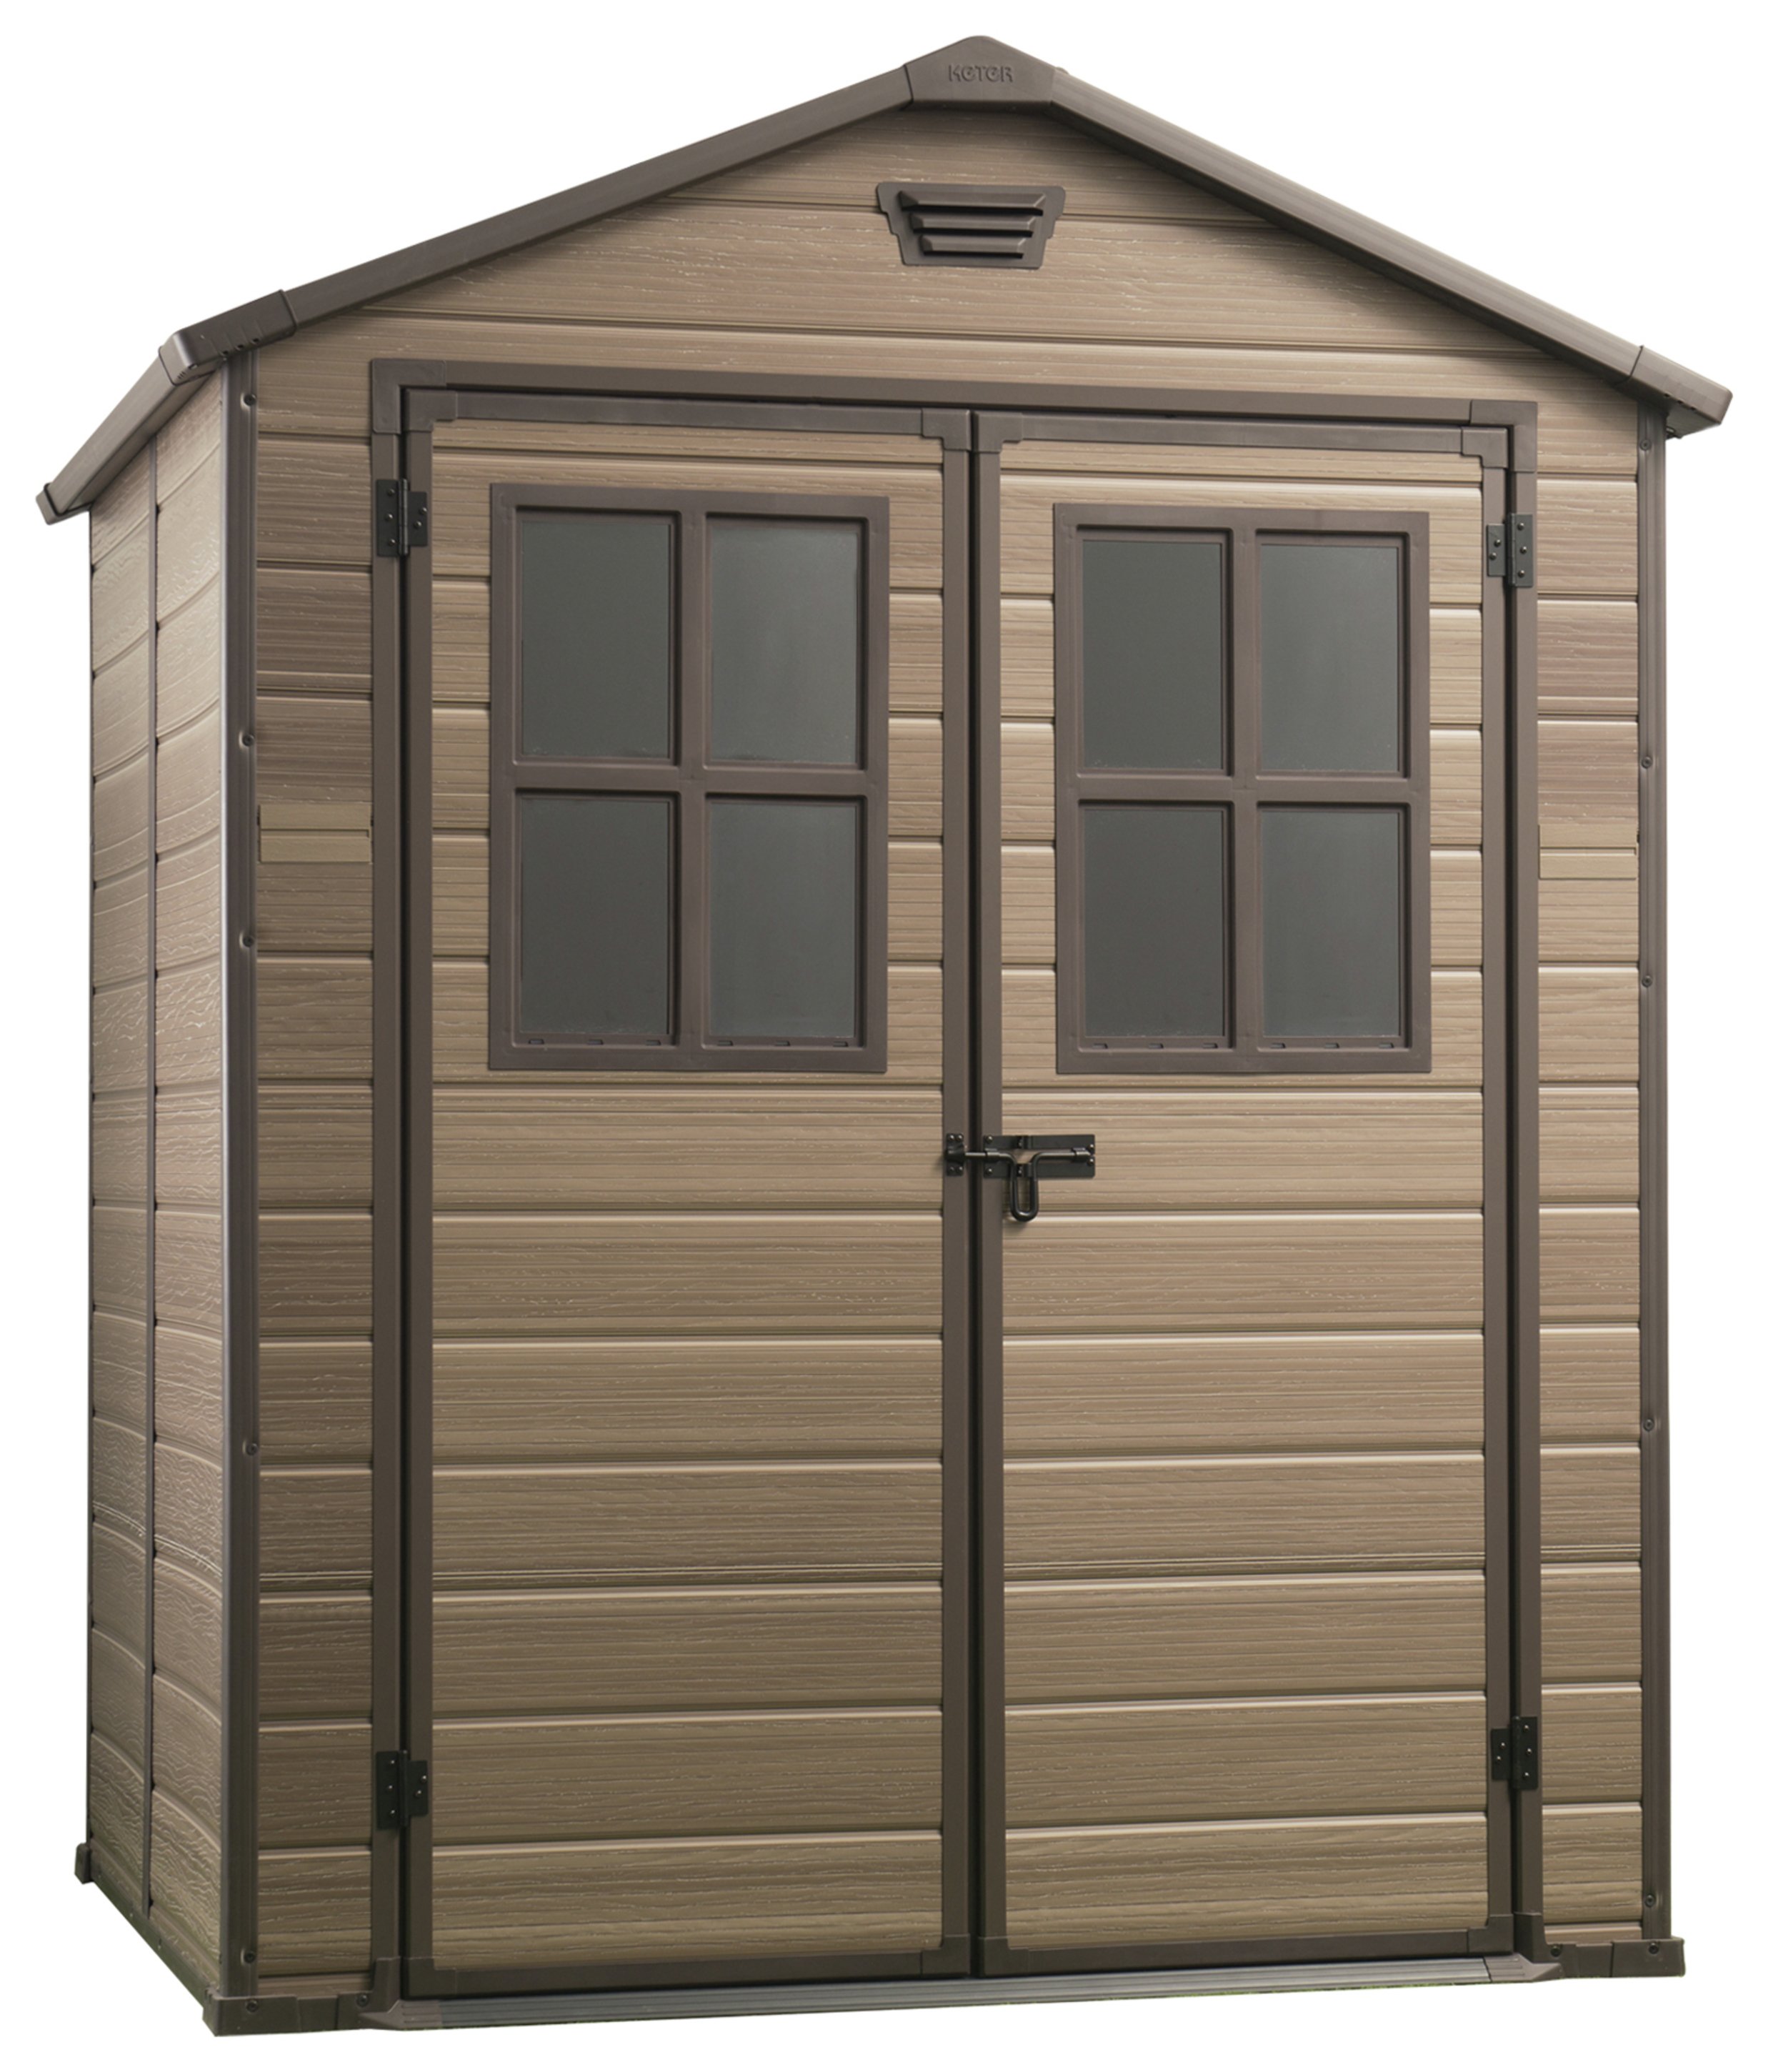 Keter Scala Plastic Garden Shed - 6 x 5ft